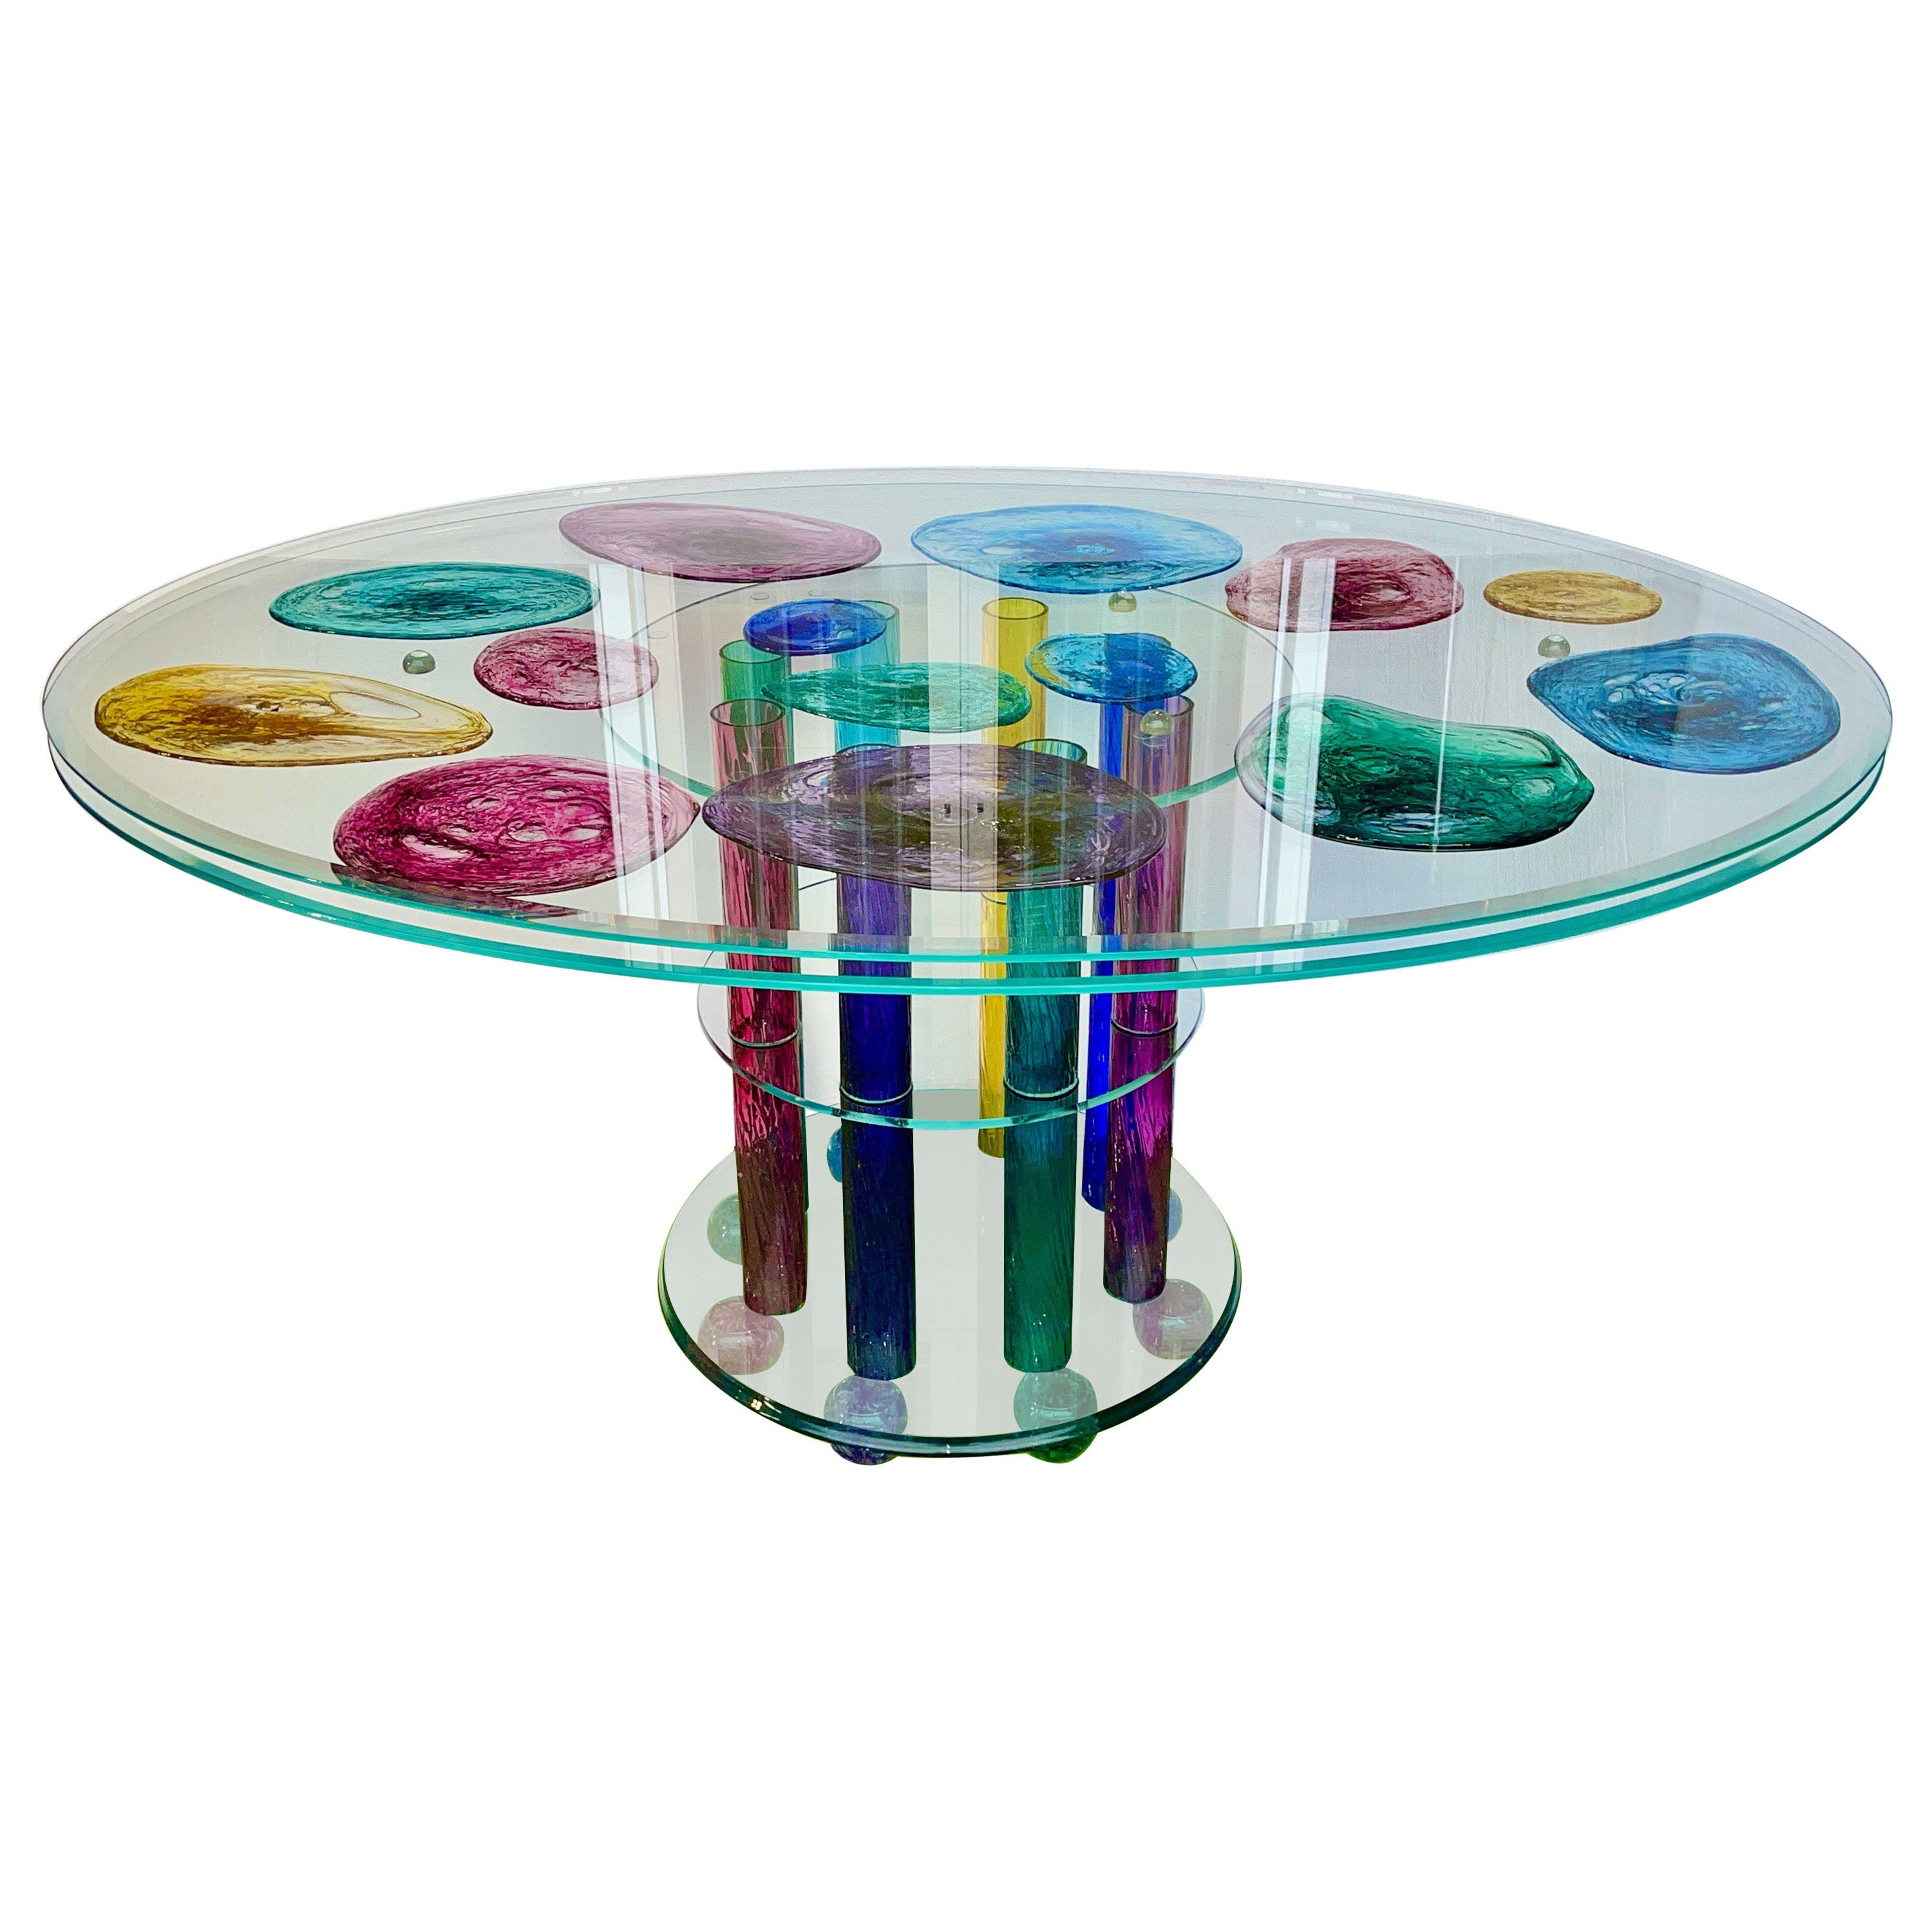 Peter Greenwood Art Glass Oval Dining Table